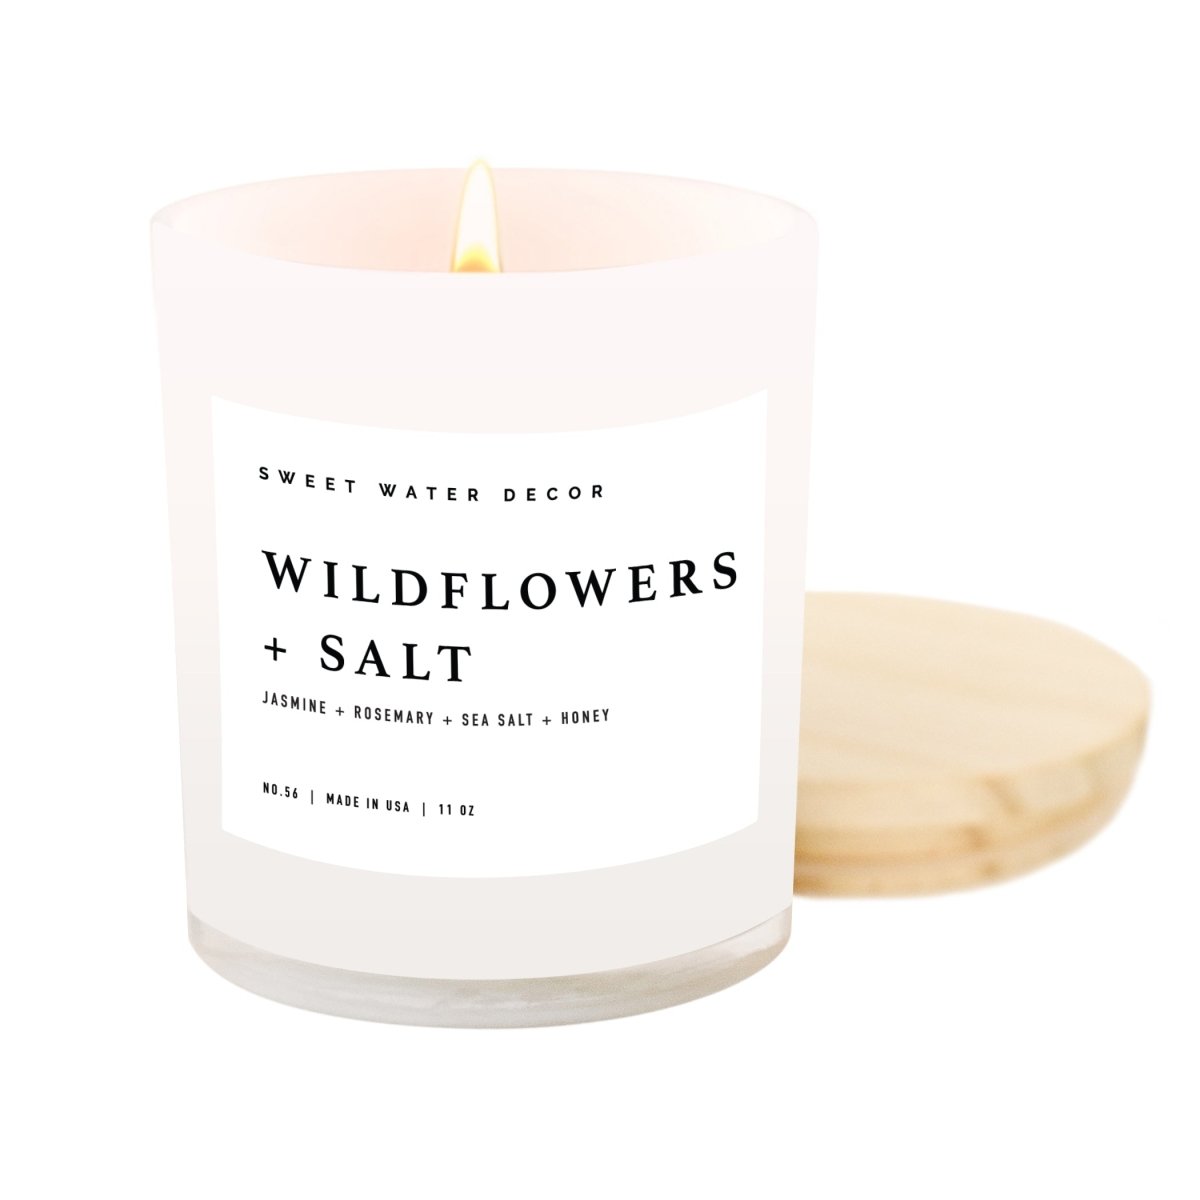 Sweet Water Decor Wildflowers and Salt Soy Candle - White Jar - 11 oz - lily & onyx